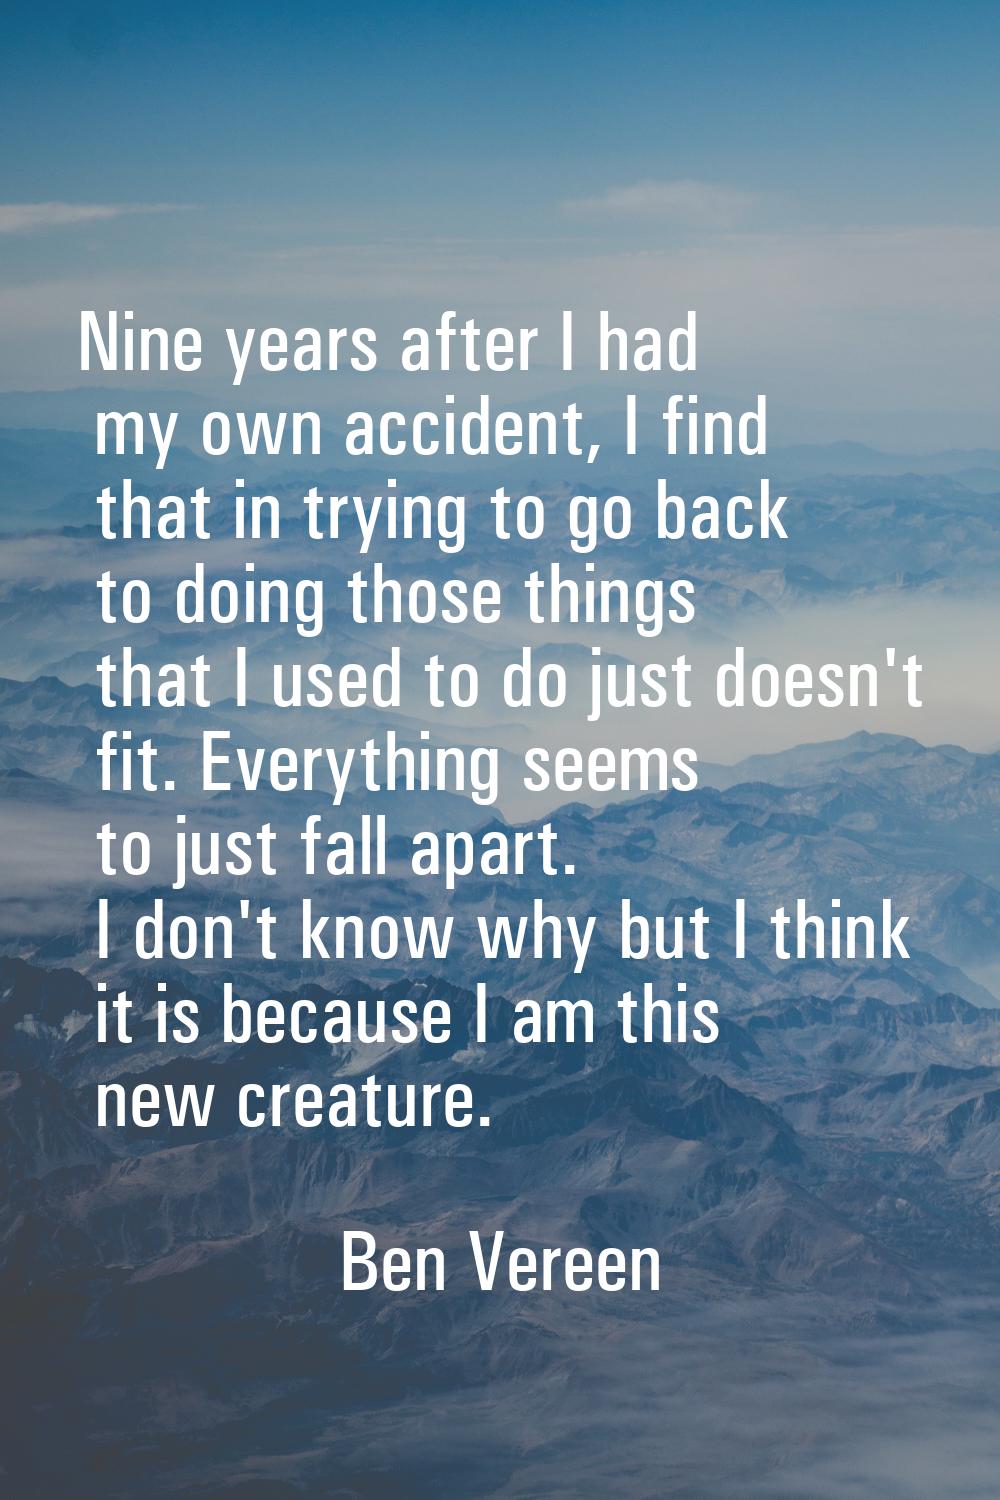 Nine years after I had my own accident, I find that in trying to go back to doing those things that